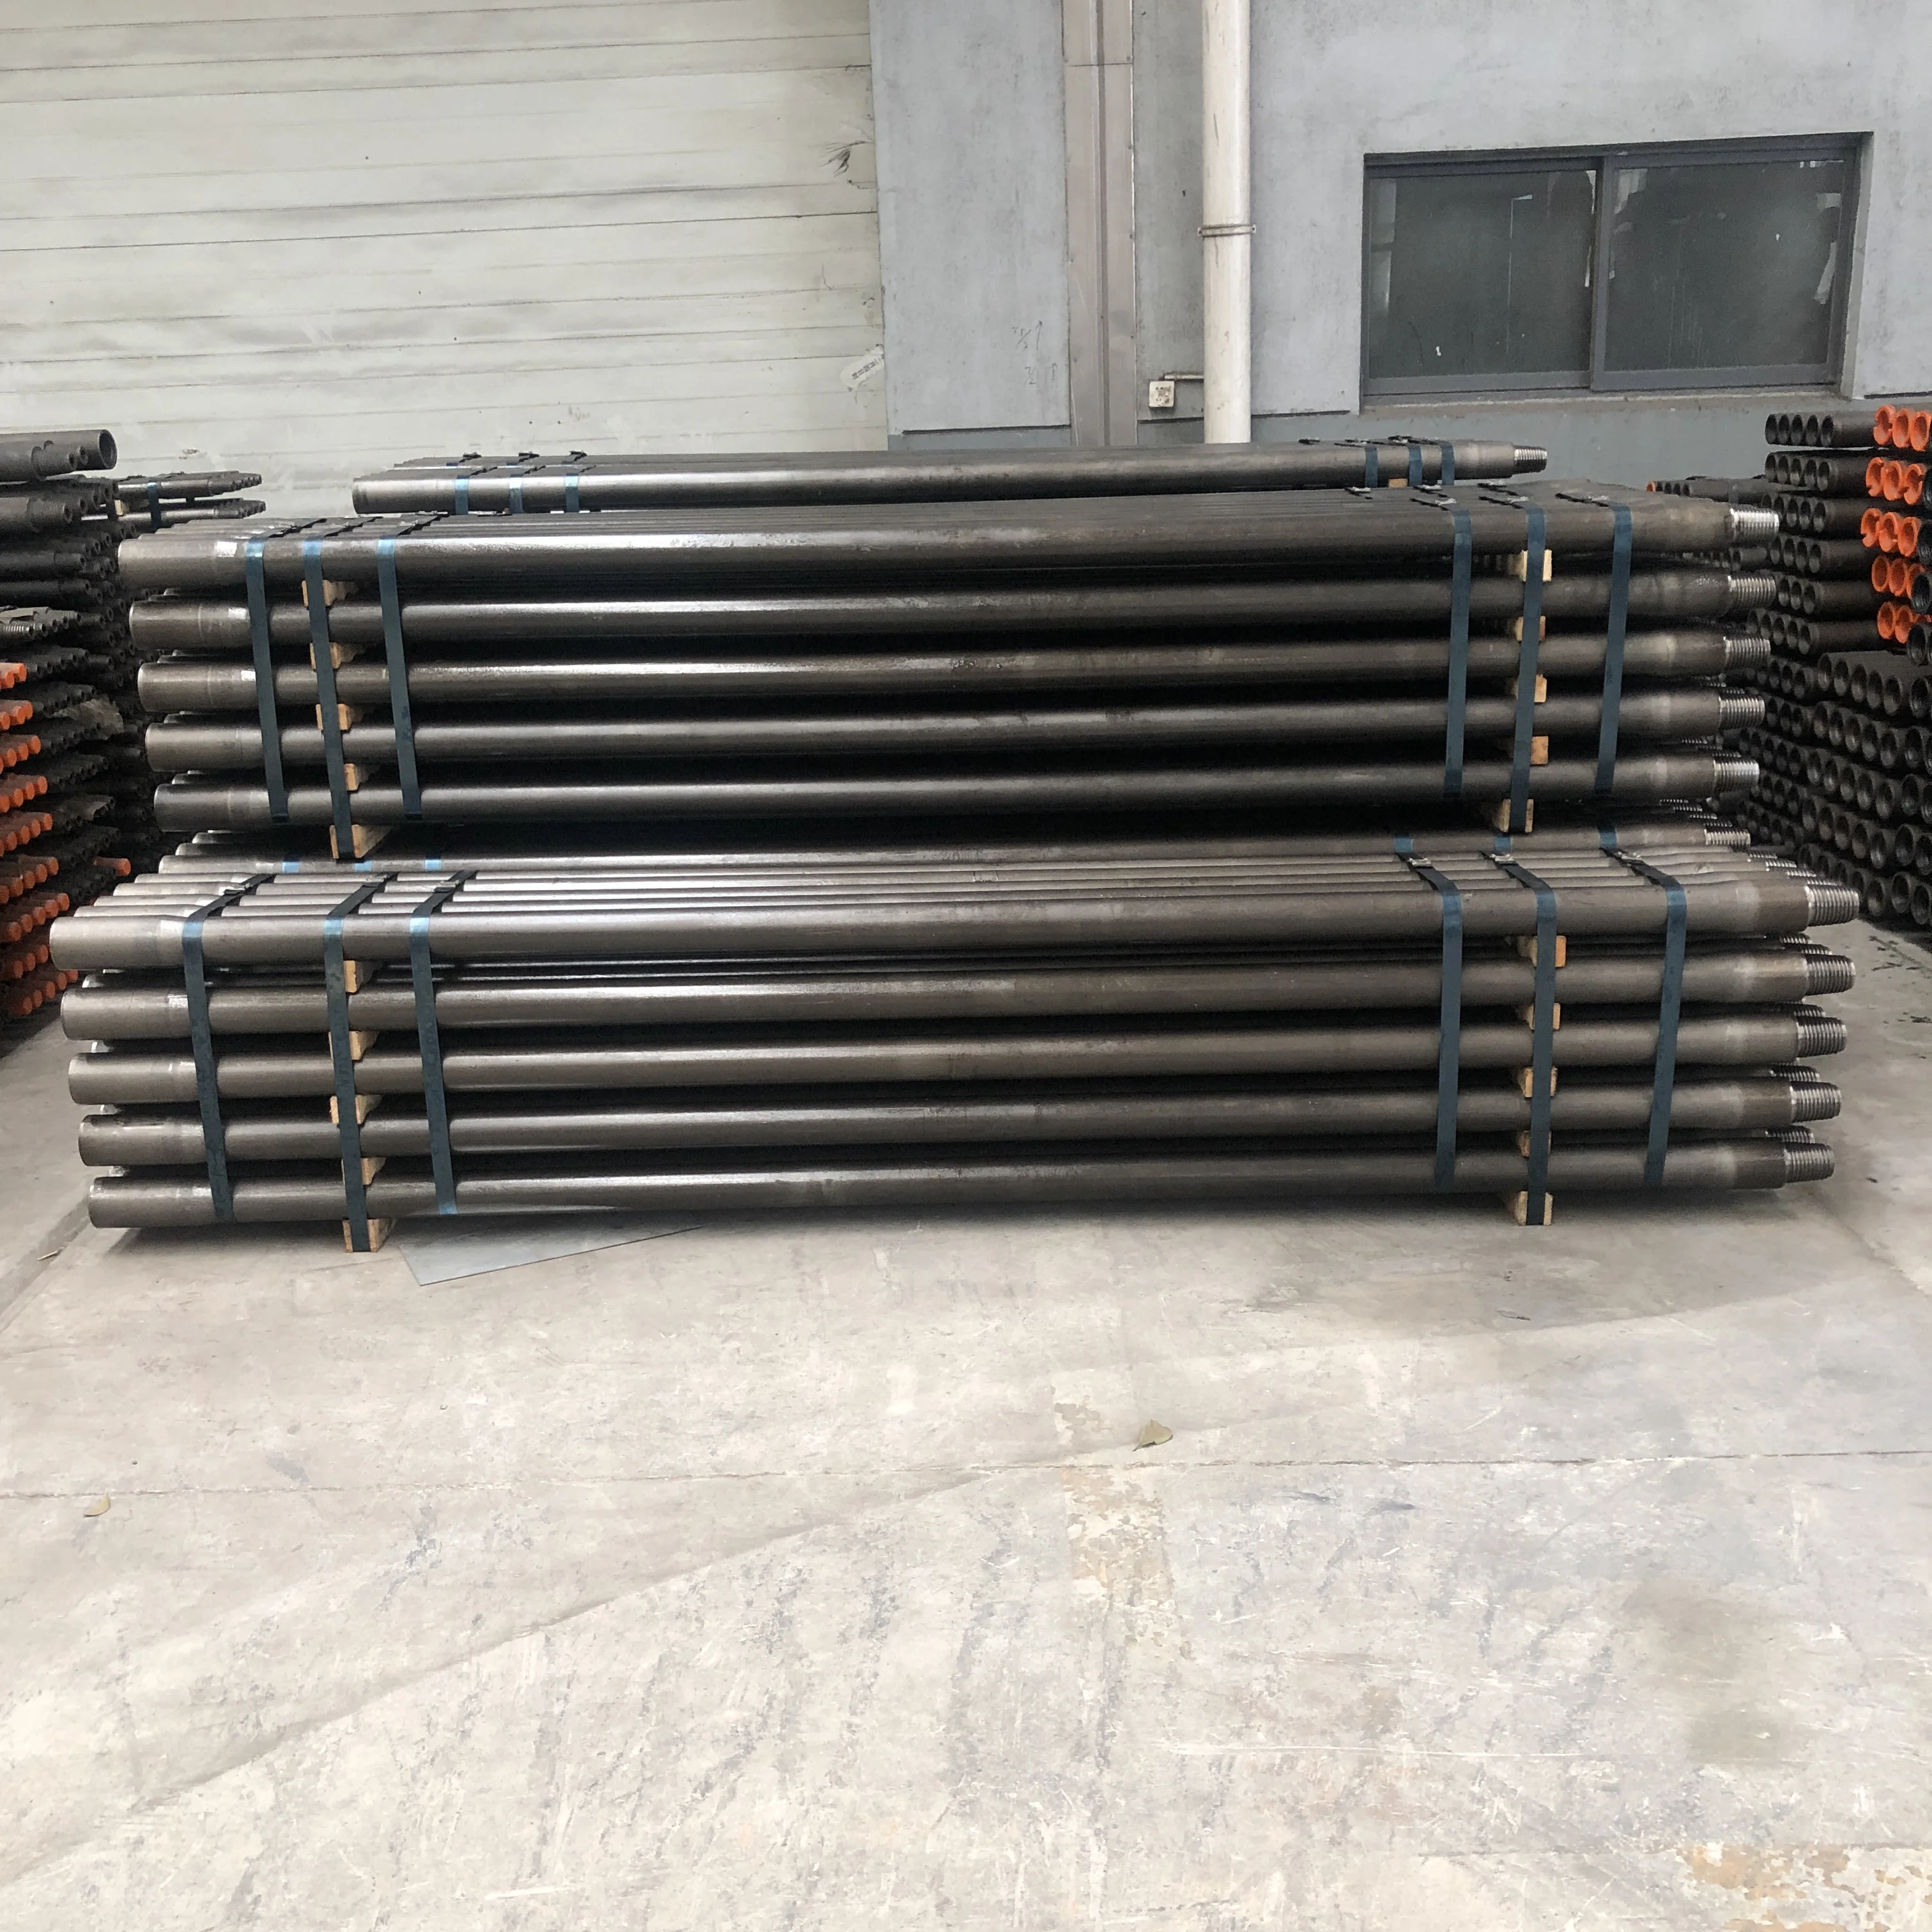 High Quality JT5 JT10 JT20 JT40 JT2020 JT4020 Ditch Witch Hdd Rod Directional Drill Pipe for HDD drill rig